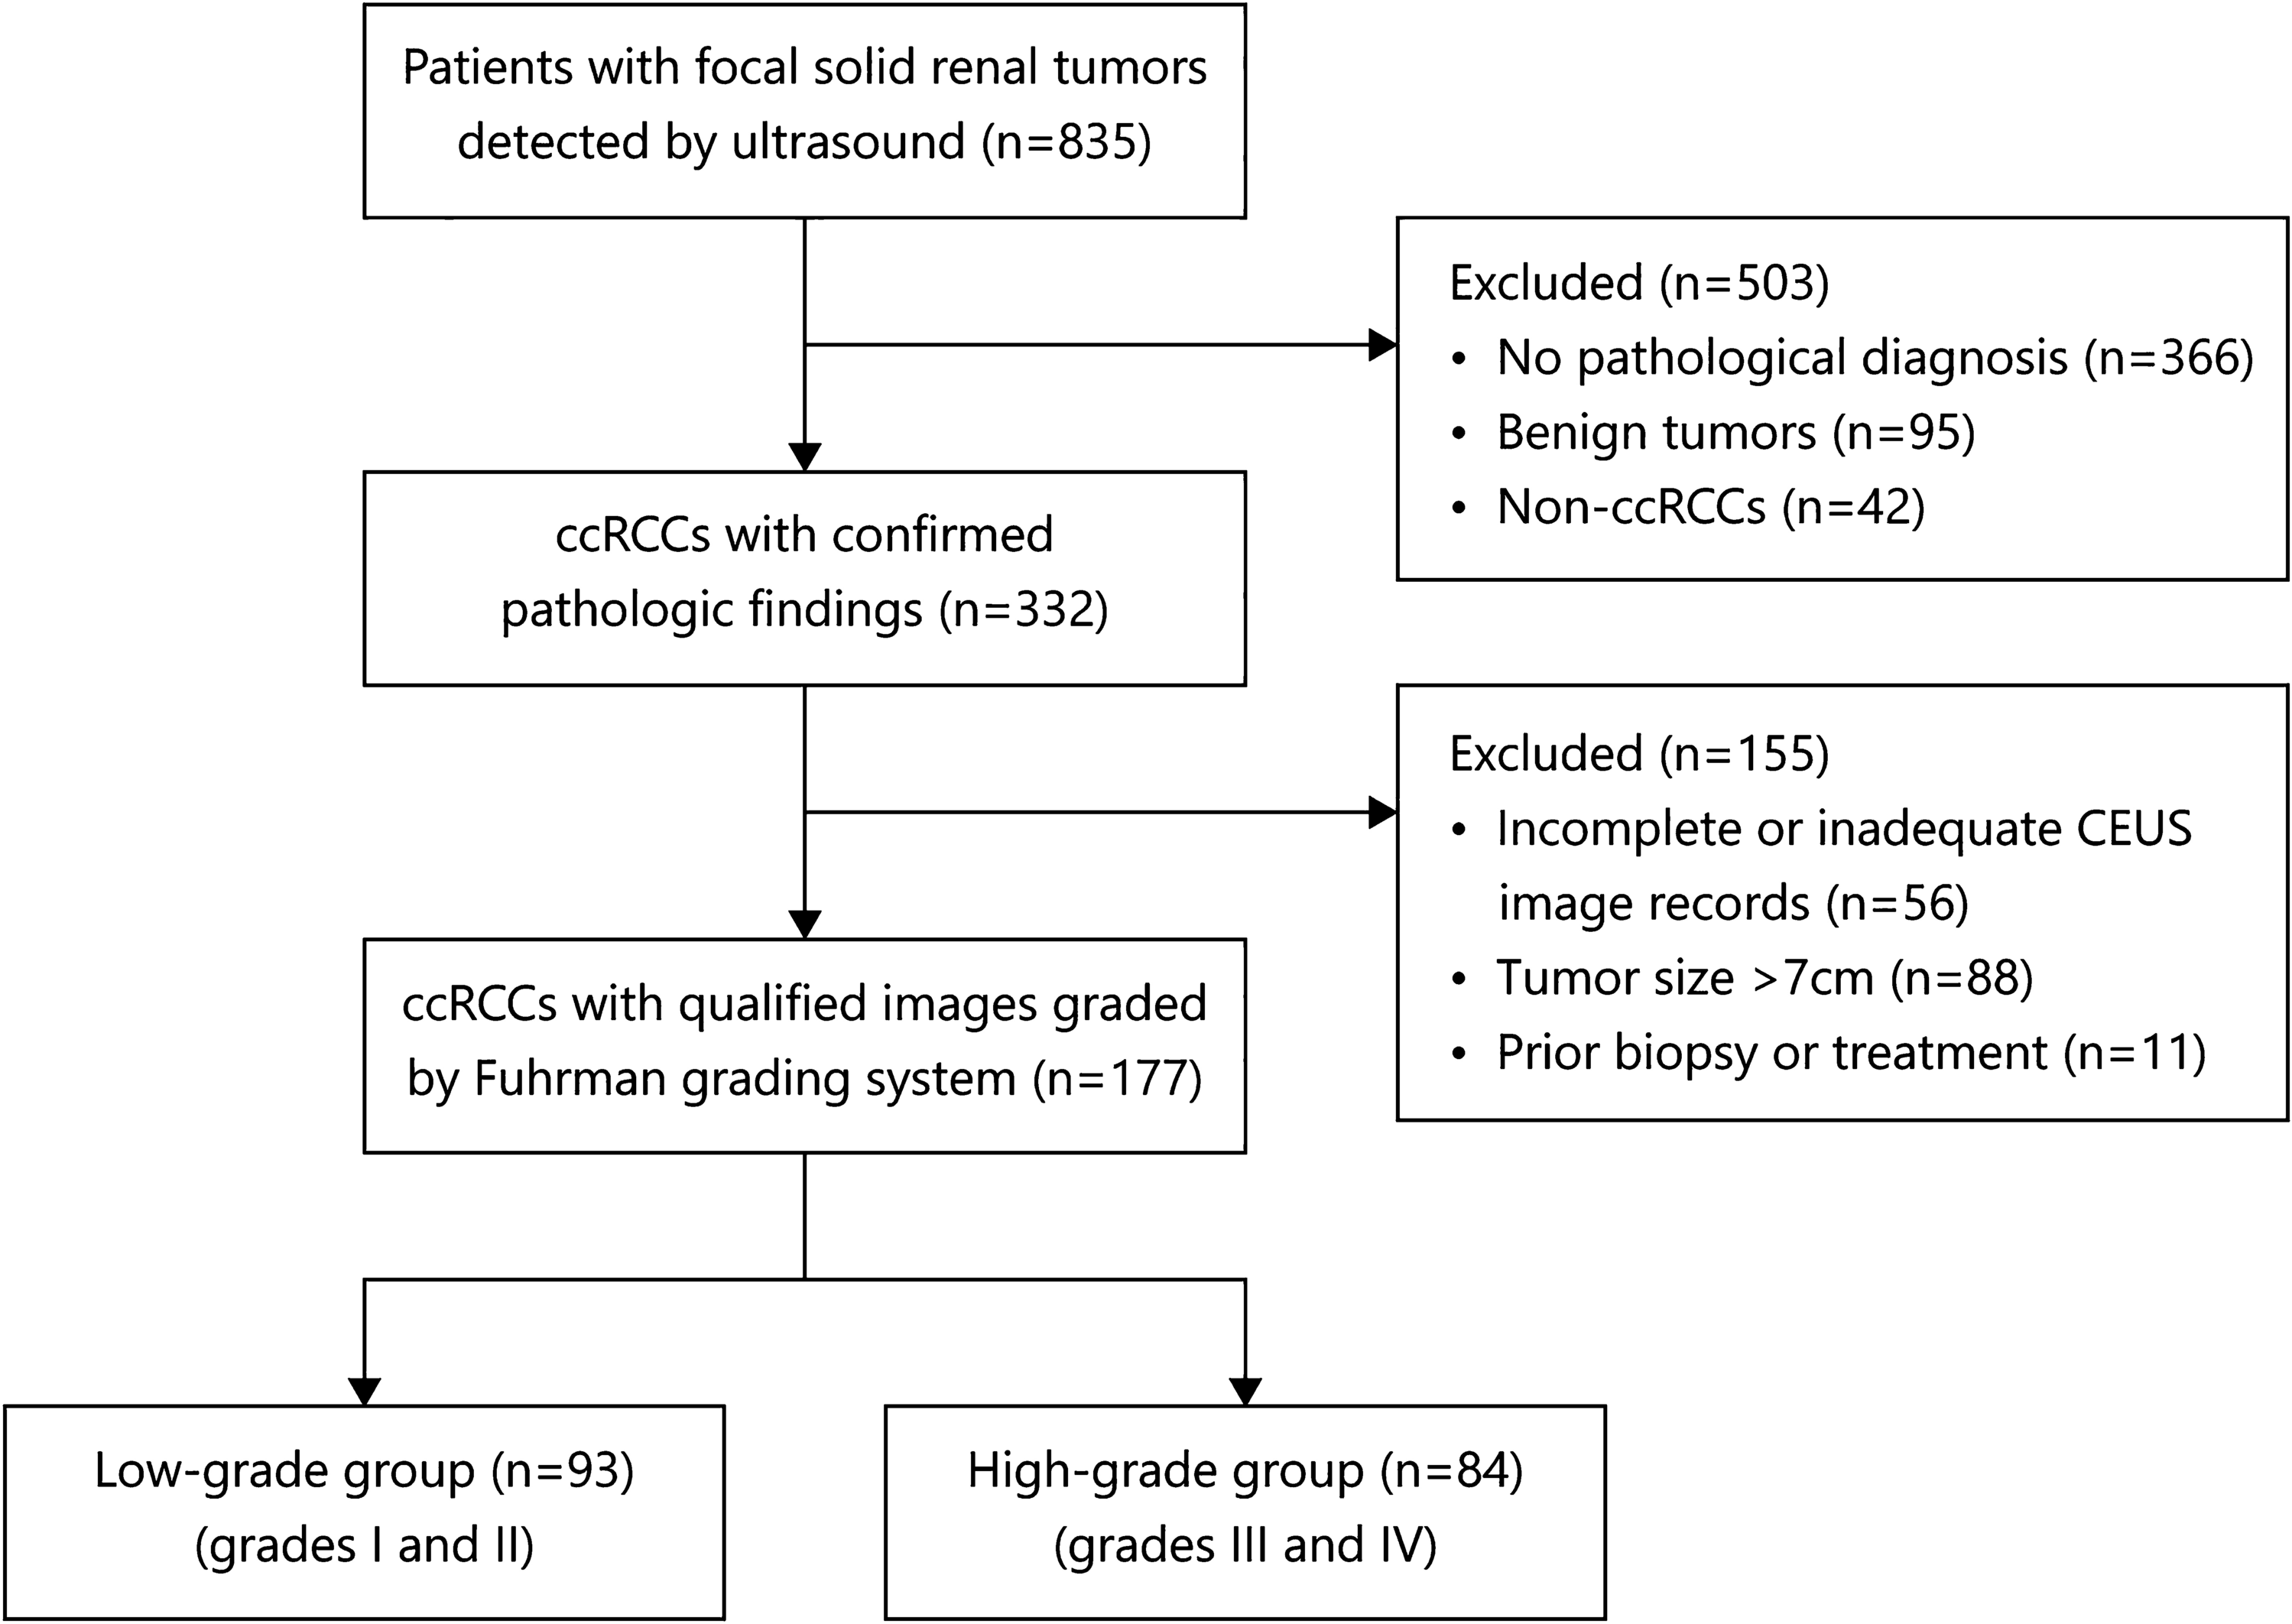 Deep learning using contrast-enhanced ultrasound images to predict the nuclear grade of clear cell renal cell carcinoma